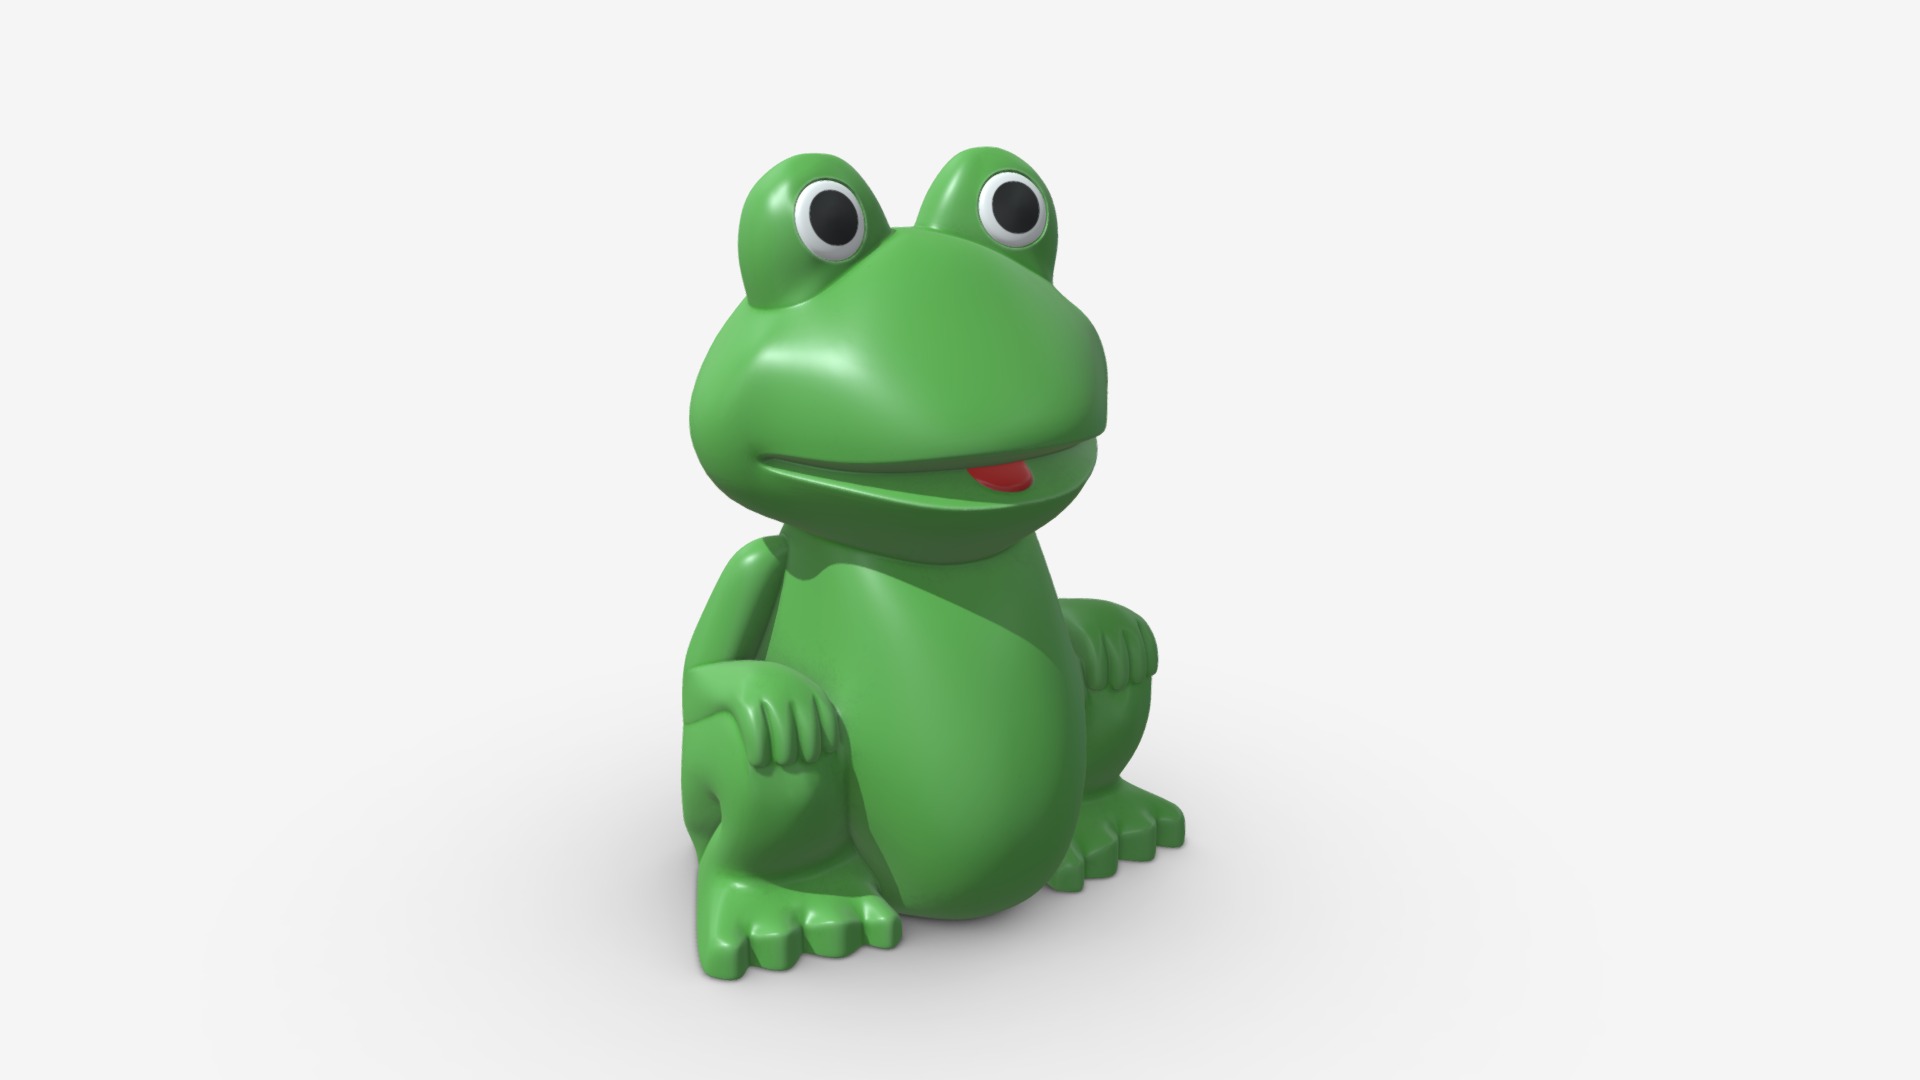 3D model green frog toy - This is a 3D model of the green frog toy. The 3D model is about a green frog with a white background.